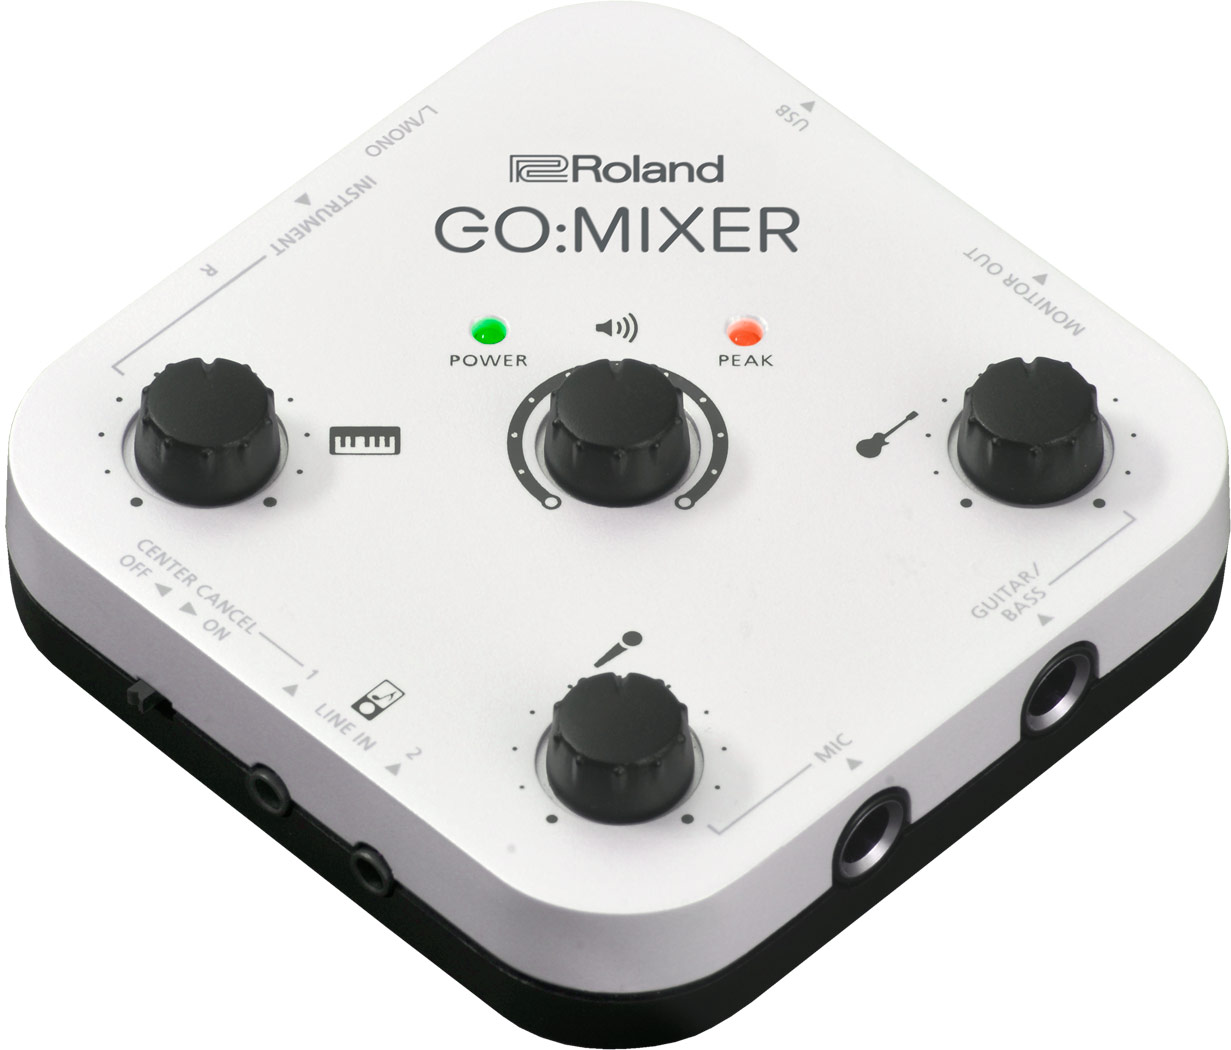 Get the perfect audio mix straight from your phone with Roland GO:MIXER